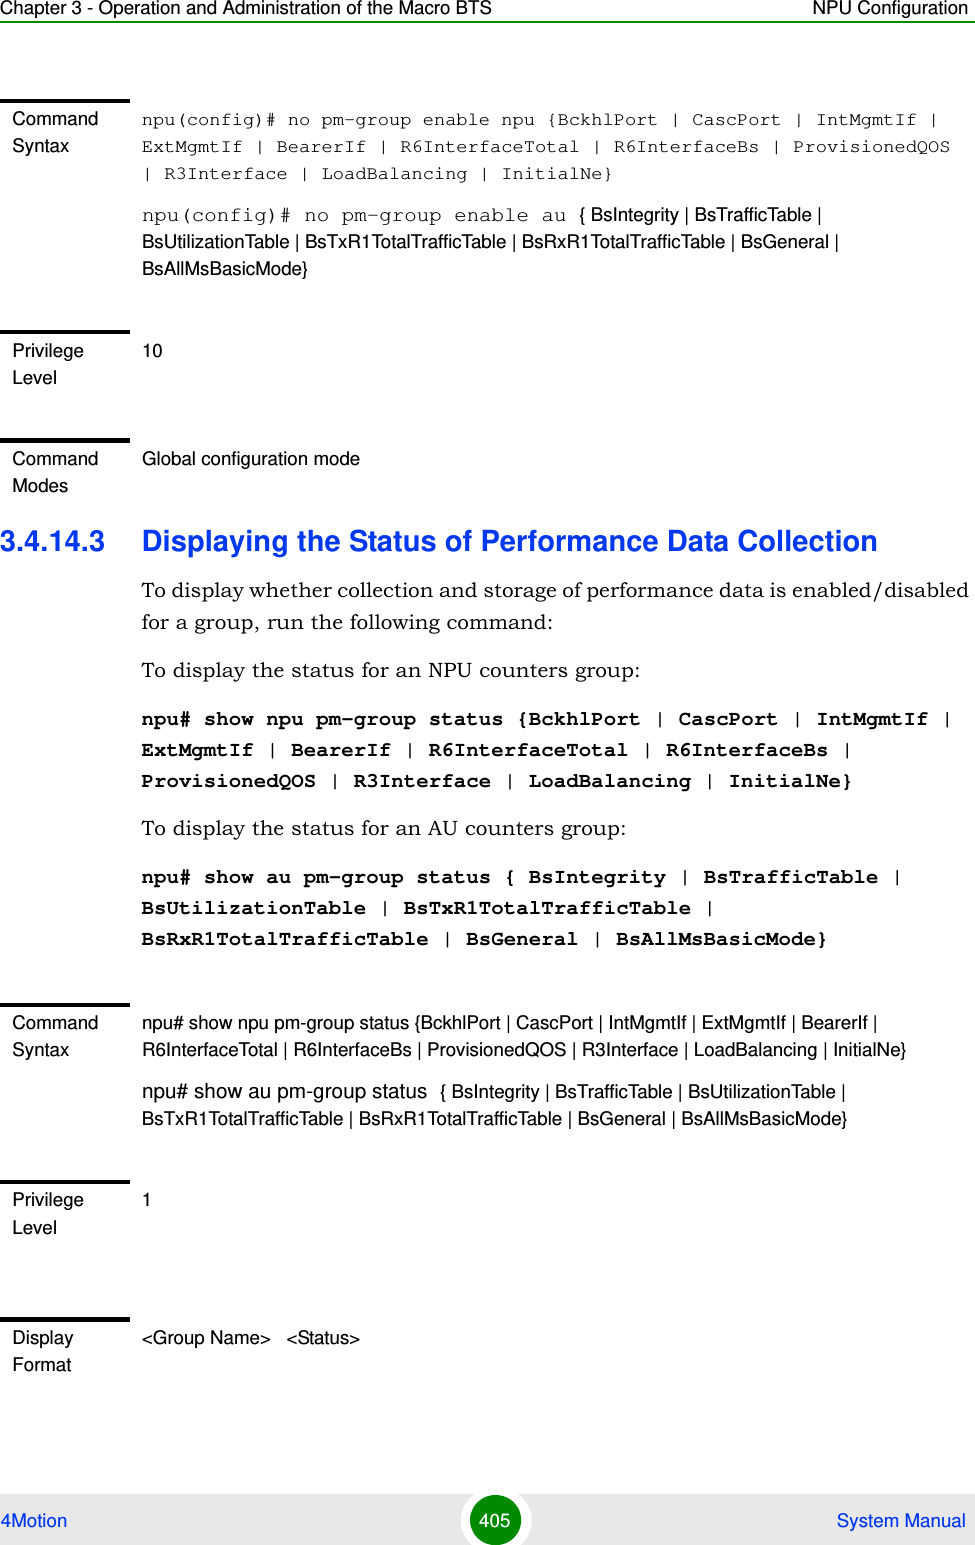 Chapter 3 - Operation and Administration of the Macro BTS NPU Configuration4Motion 405  System Manual3.4.14.3 Displaying the Status of Performance Data CollectionTo display whether collection and storage of performance data is enabled/disabled for a group, run the following command:To display the status for an NPU counters group:npu# show npu pm-group status {BckhlPort | CascPort | IntMgmtIf | ExtMgmtIf | BearerIf | R6InterfaceTotal | R6InterfaceBs | ProvisionedQOS | R3Interface | LoadBalancing | InitialNe}To display the status for an AU counters group:npu# show au pm-group status { BsIntegrity | BsTrafficTable | BsUtilizationTable | BsTxR1TotalTrafficTable | BsRxR1TotalTrafficTable | BsGeneral | BsAllMsBasicMode}Command Syntaxnpu(config)# no pm-group enable npu {BckhlPort | CascPort | IntMgmtIf | ExtMgmtIf | BearerIf | R6InterfaceTotal | R6InterfaceBs | ProvisionedQOS | R3Interface | LoadBalancing | InitialNe}npu(config)# no pm-group enable au { BsIntegrity | BsTrafficTable | BsUtilizationTable | BsTxR1TotalTrafficTable | BsRxR1TotalTrafficTable | BsGeneral | BsAllMsBasicMode}Privilege Level10Command ModesGlobal configuration modeCommand Syntaxnpu# show npu pm-group status {BckhlPort | CascPort | IntMgmtIf | ExtMgmtIf | BearerIf | R6InterfaceTotal | R6InterfaceBs | ProvisionedQOS | R3Interface | LoadBalancing | InitialNe}npu# show au pm-group status { BsIntegrity | BsTrafficTable | BsUtilizationTable | BsTxR1TotalTrafficTable | BsRxR1TotalTrafficTable | BsGeneral | BsAllMsBasicMode}Privilege Level1Display Format&lt;Group Name&gt;   &lt;Status&gt;